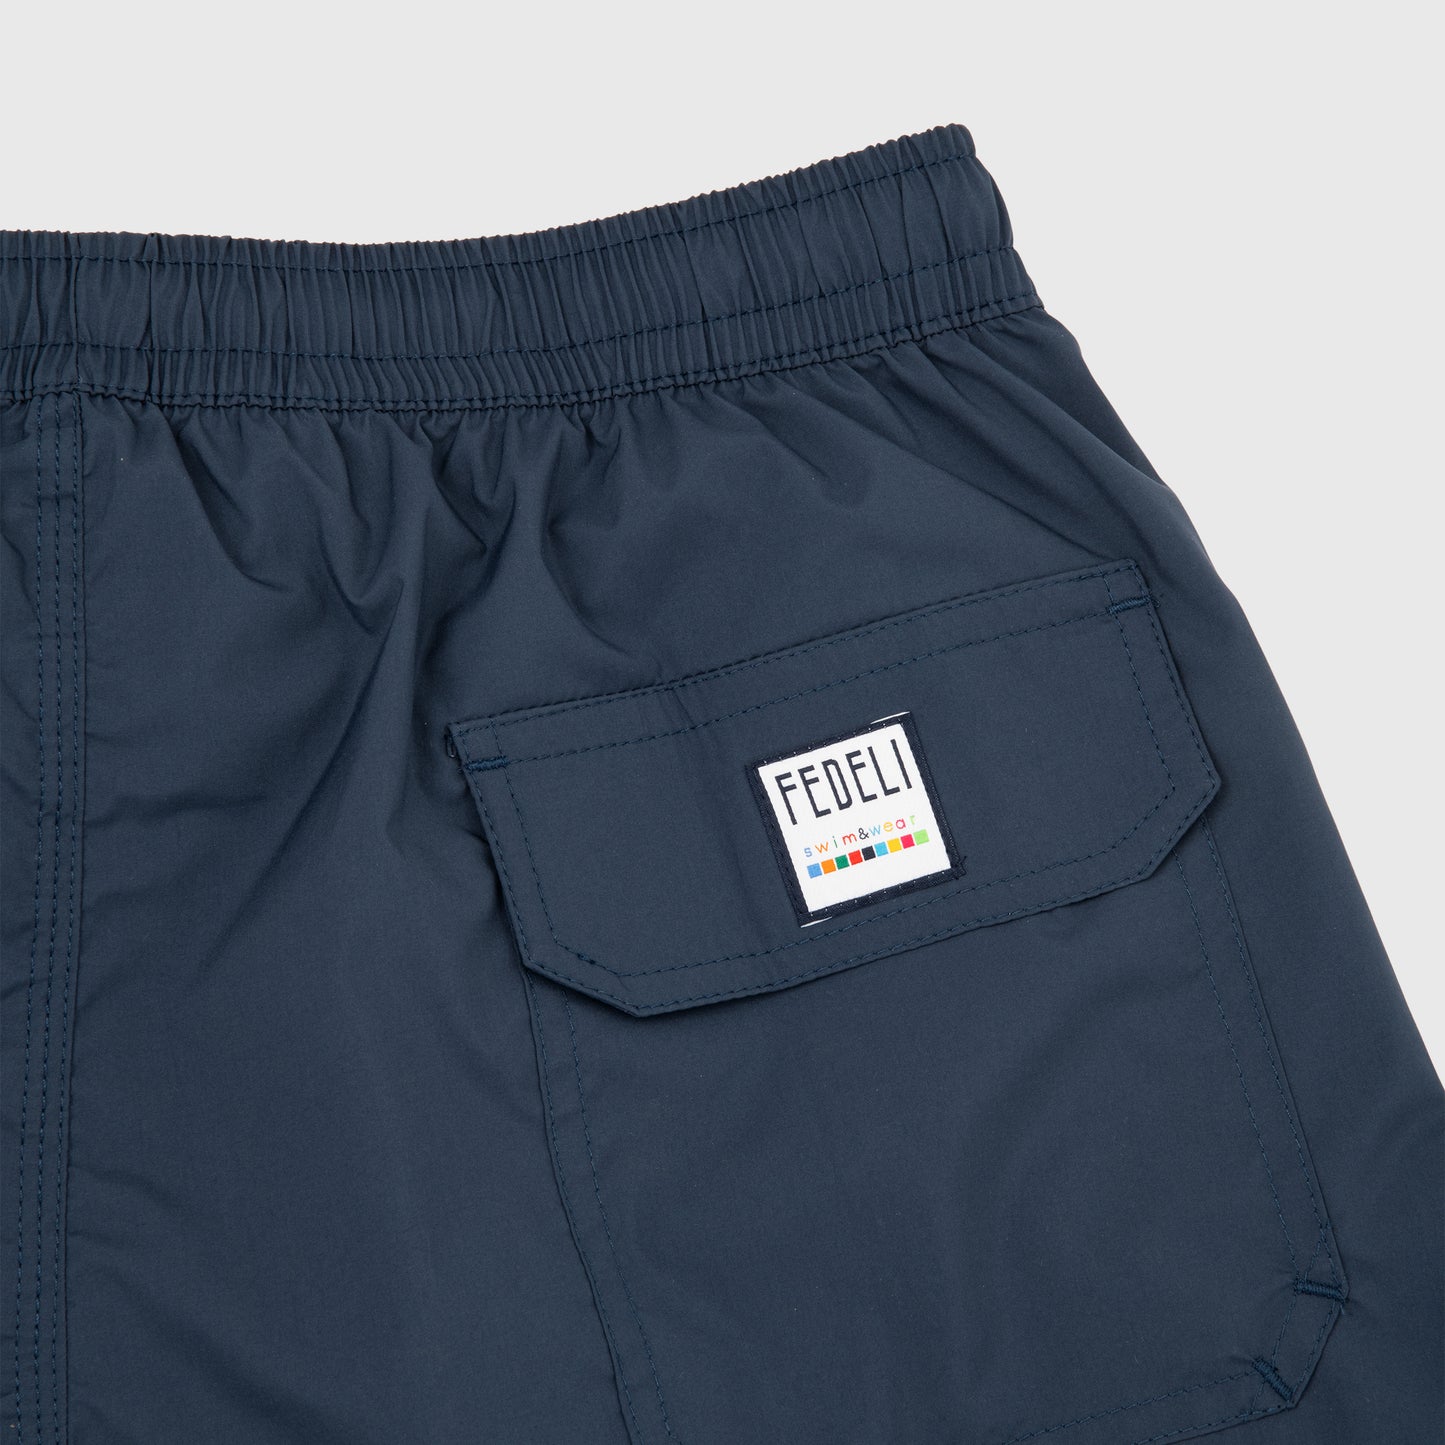 Madeira Solid Color Swim Trunk Navy 141